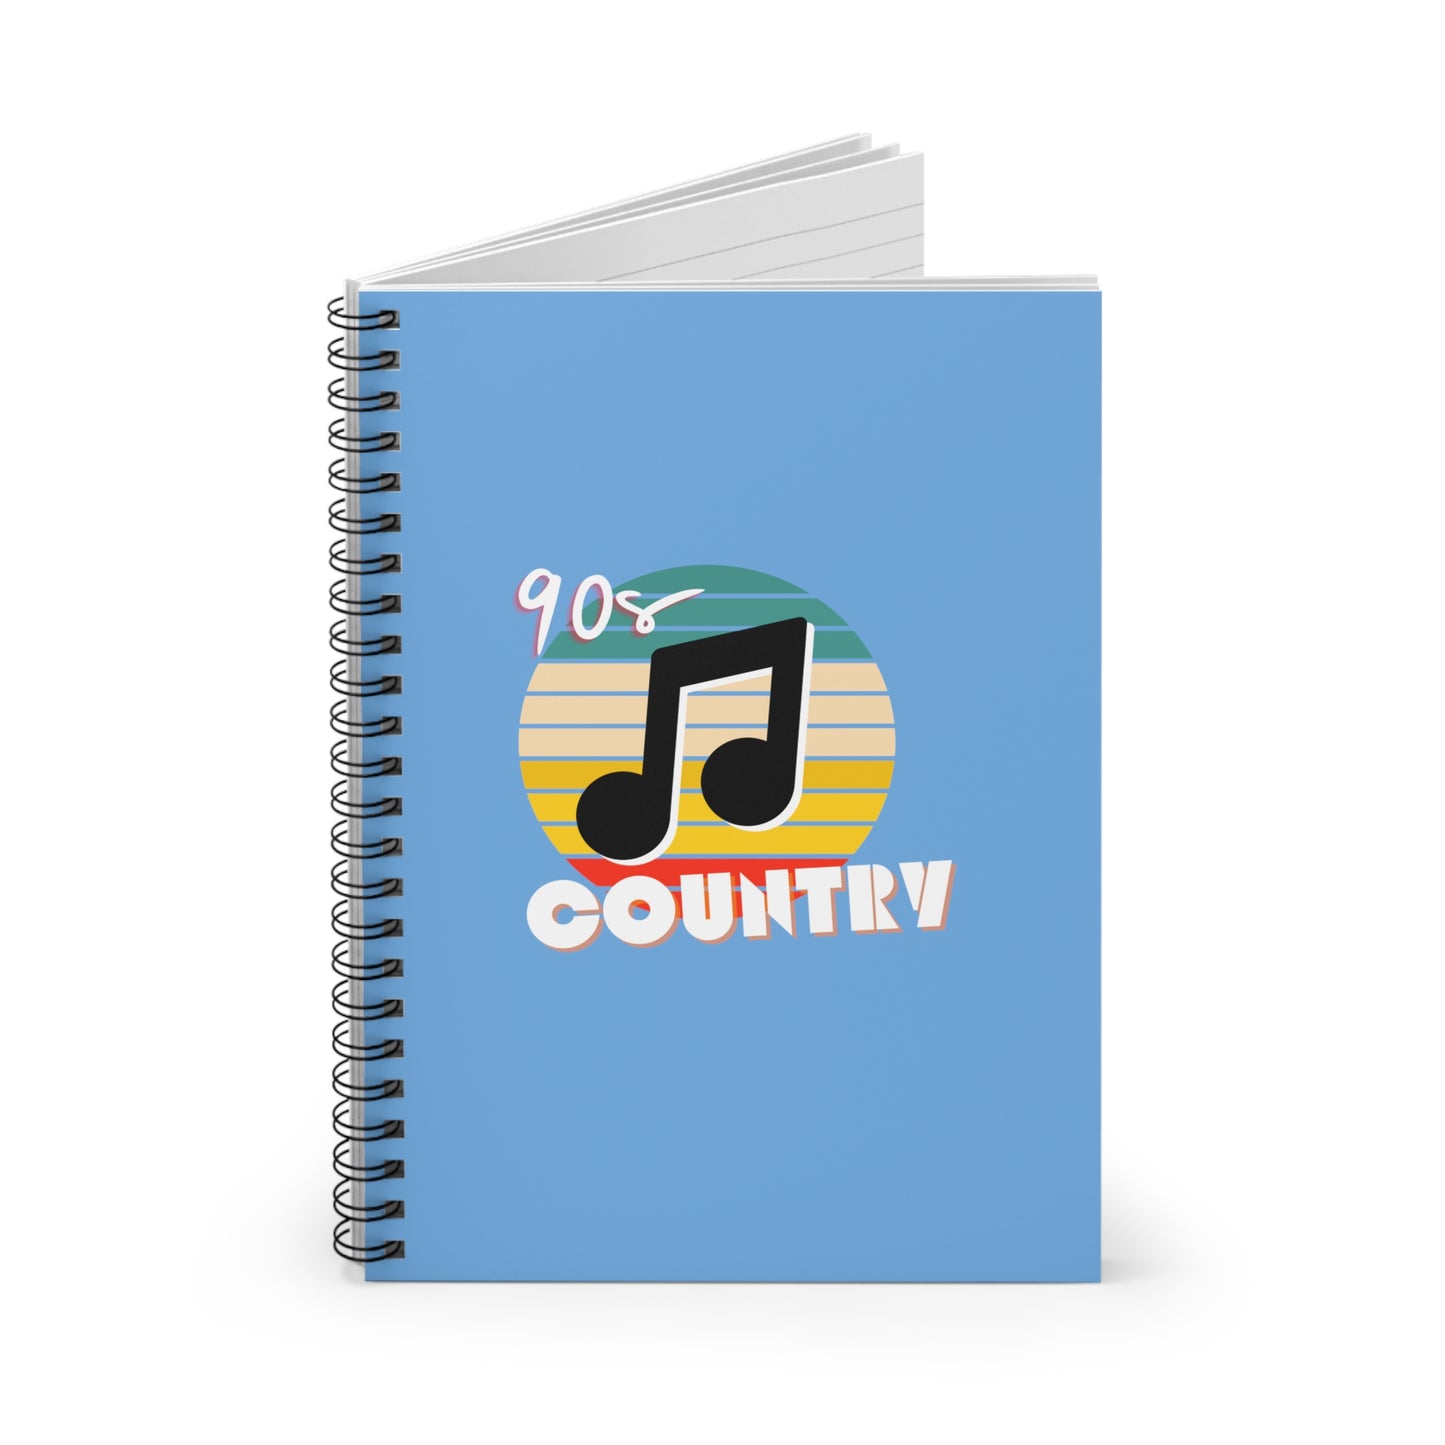 Spiral Notebook - 90s Country